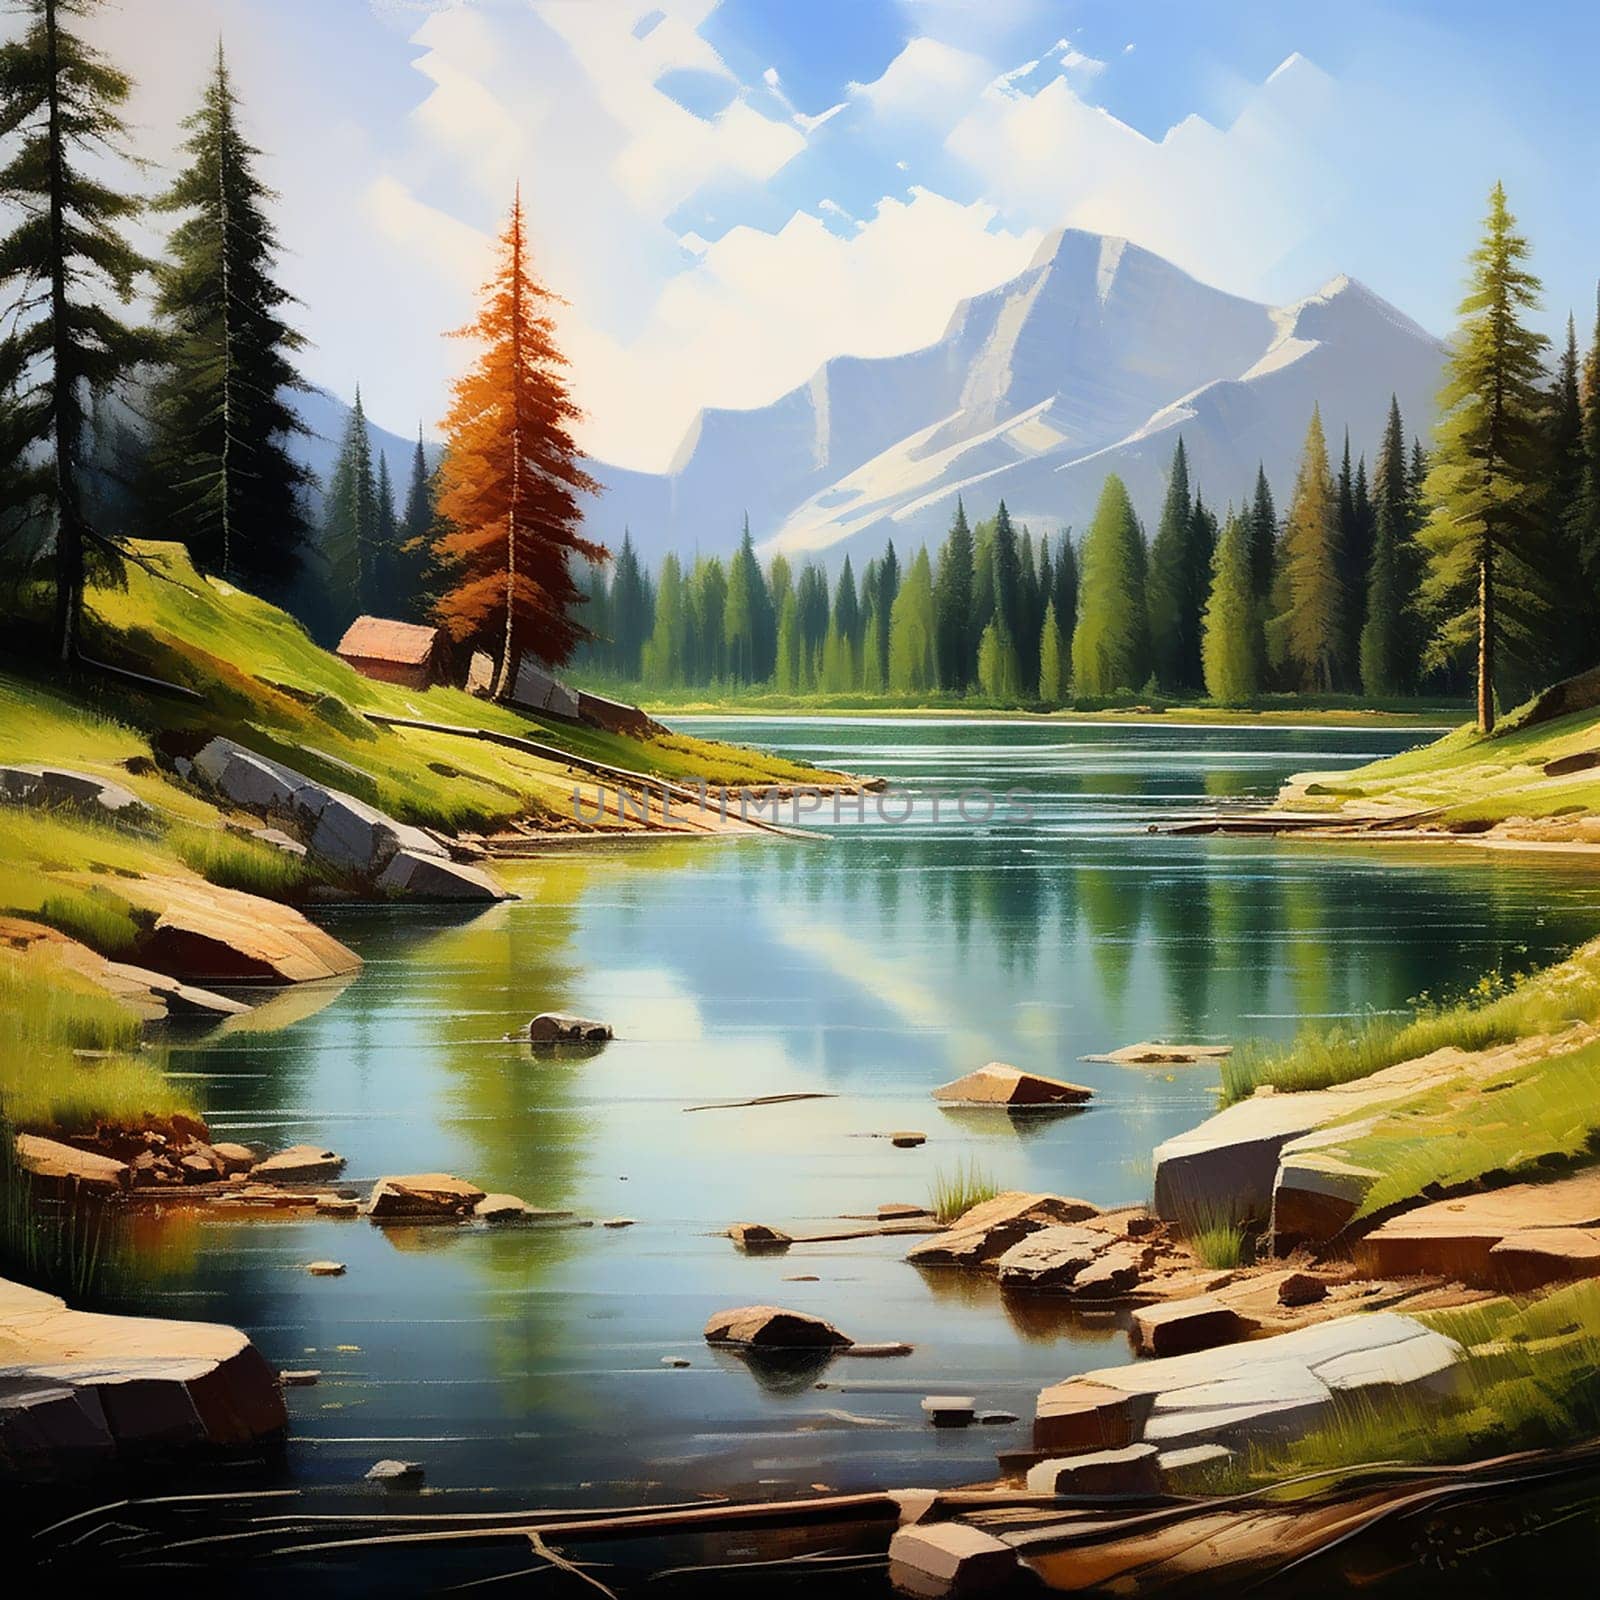 Mountain Oasis: Tranquility in the Scenic Beauty of Lake, Stream, and Pine Trees